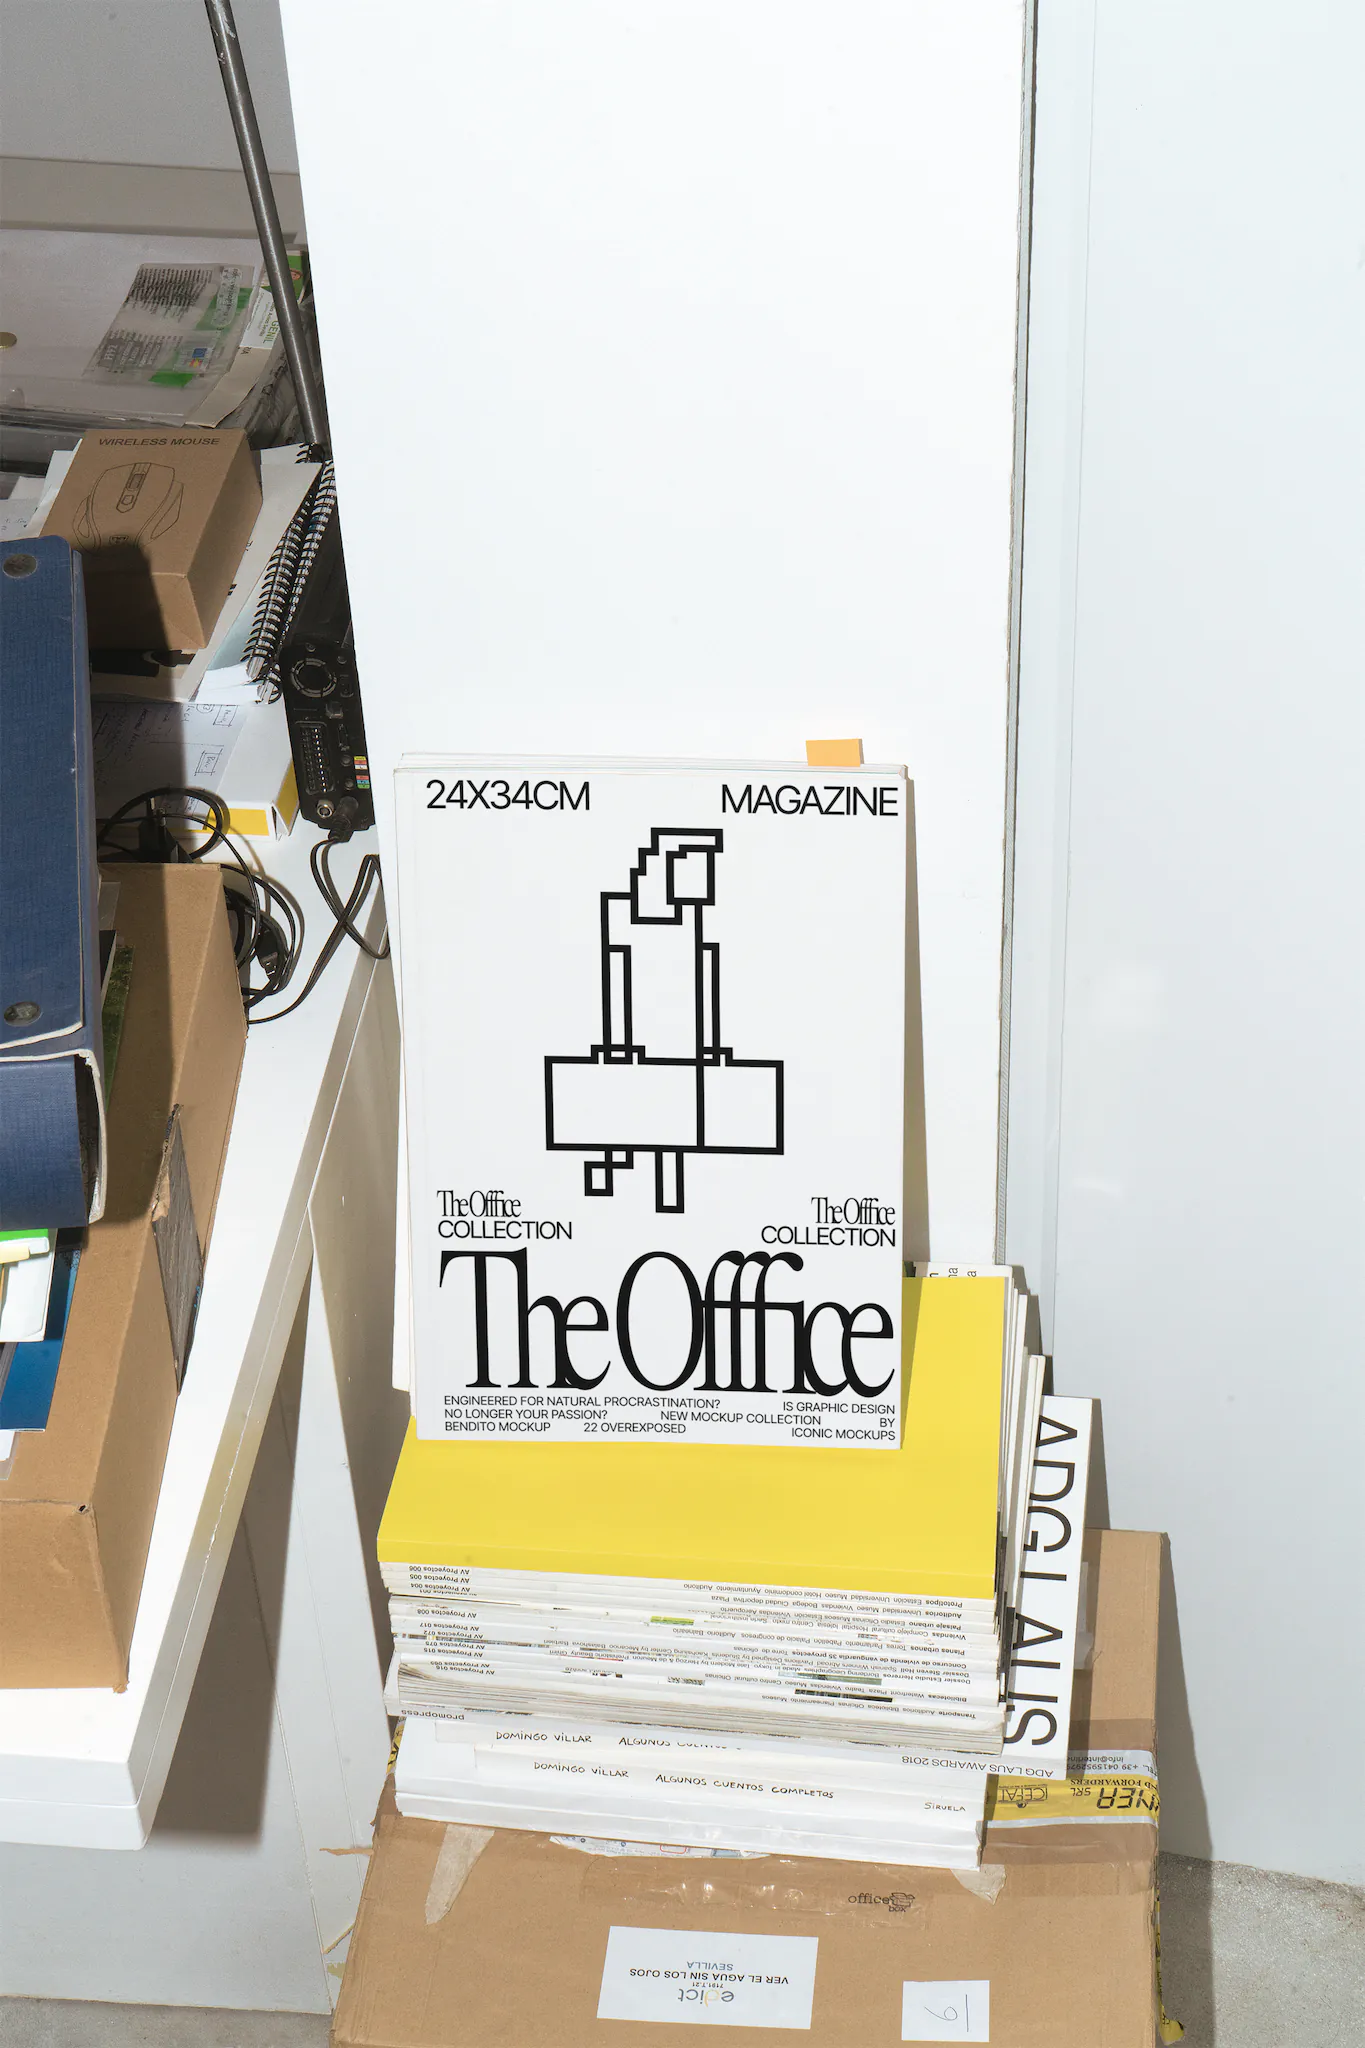 Magazine cover mockup on top of books in a office scene